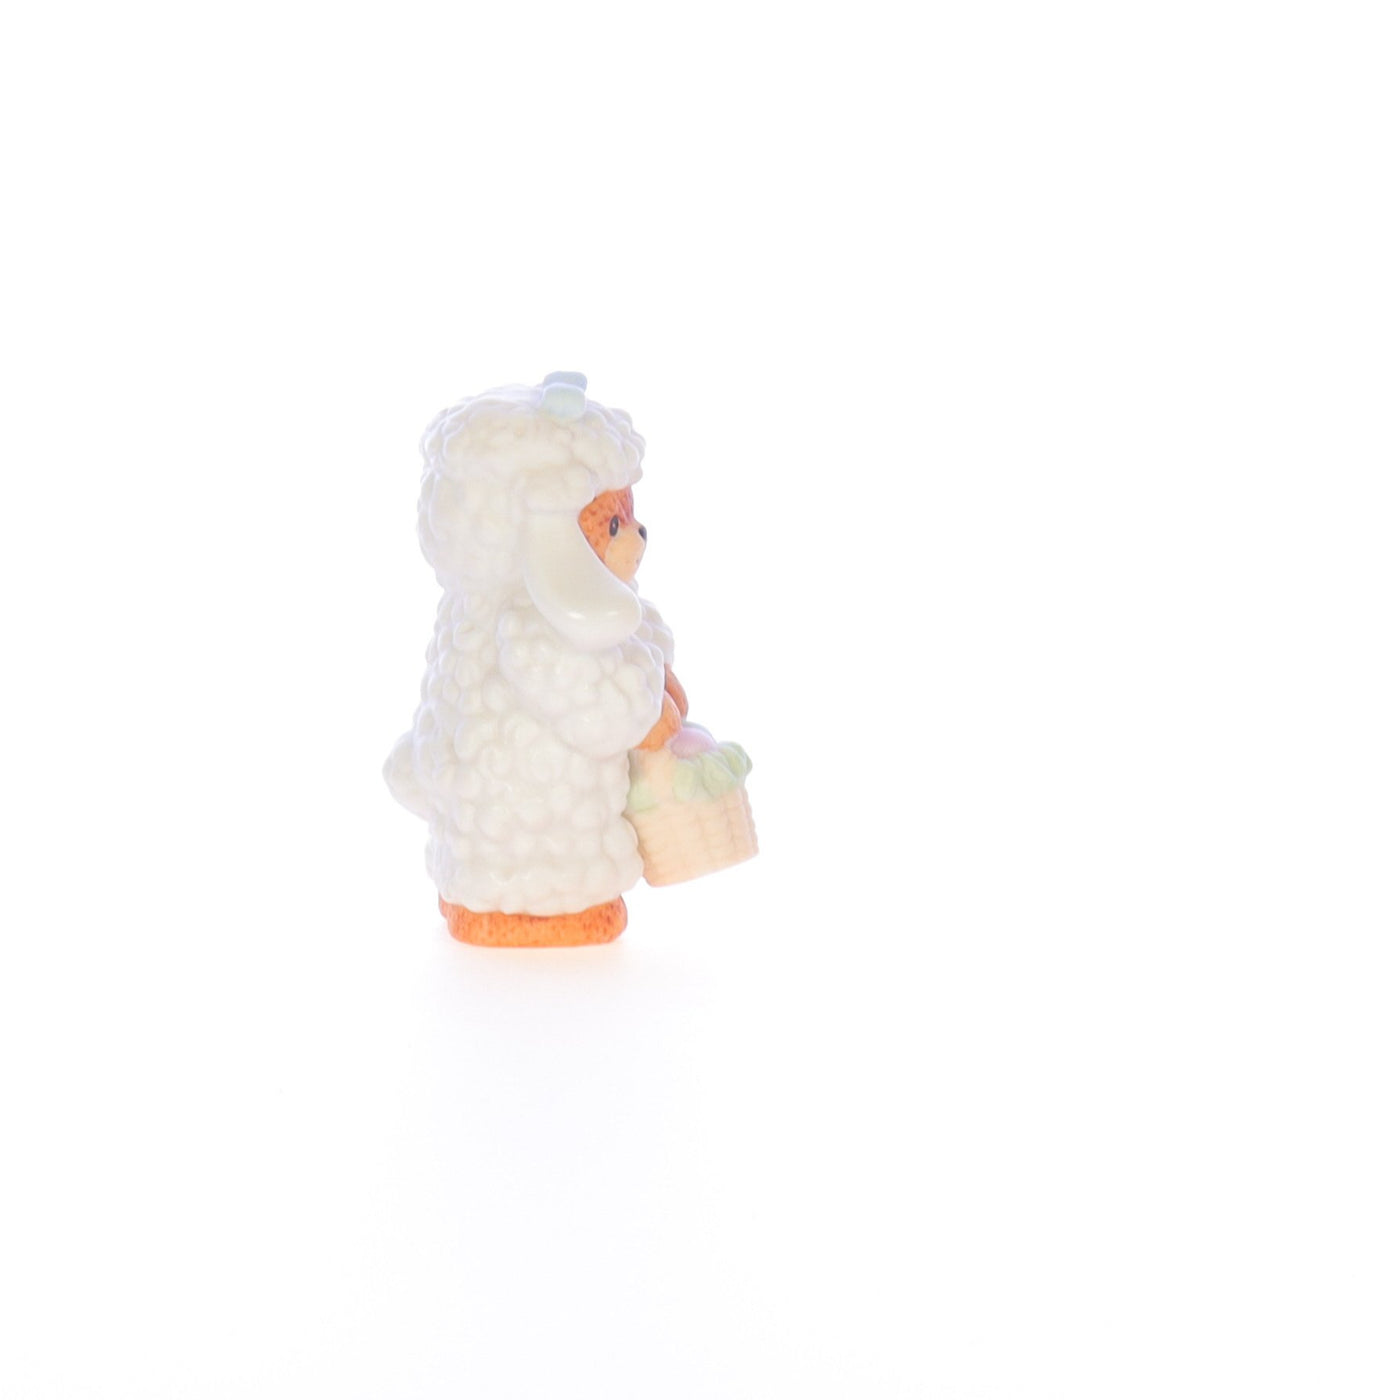 Lucy_And_Me_by_Lucy_Atwell_Porcelain_Figurine_Bear_in_Sheep_Costume_Lucy_Unknown_051_07